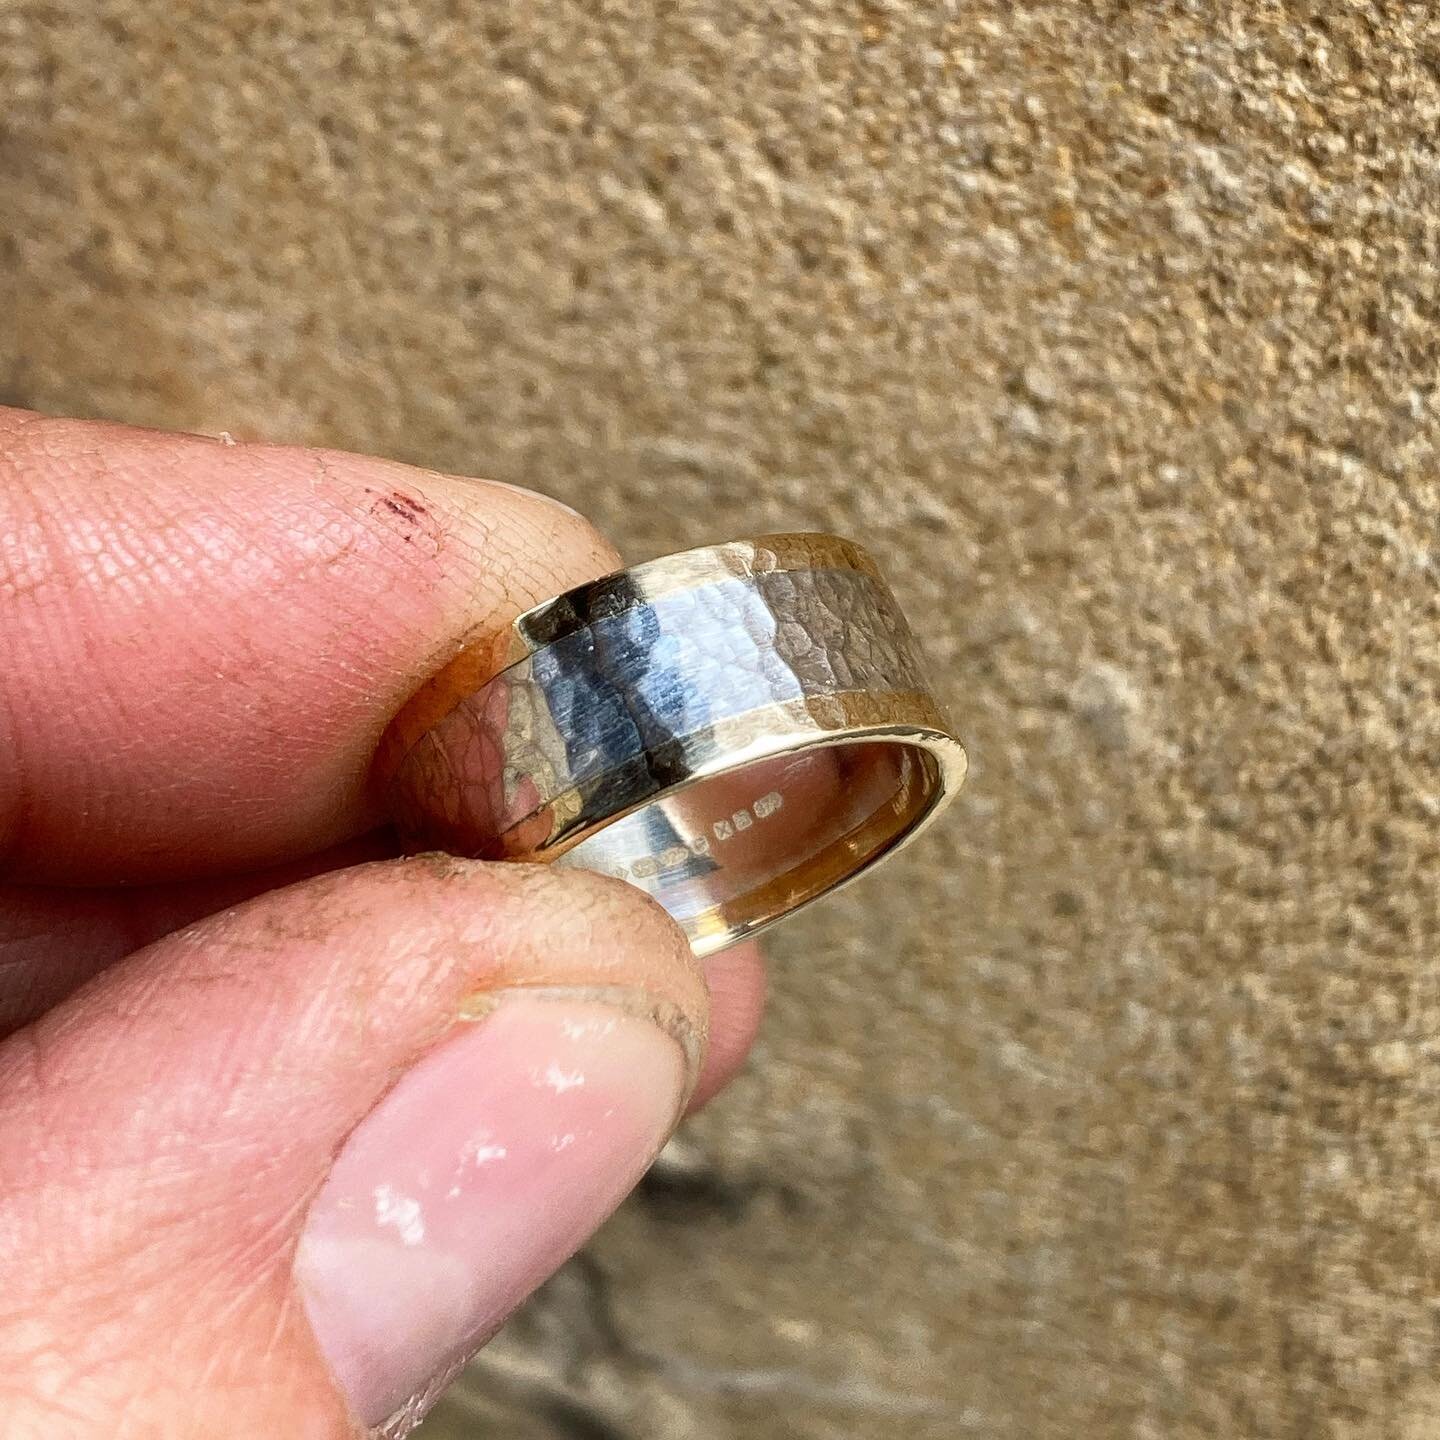 Two toned silver and gold hammered ring delivered to @hanniatkinson at today&rsquo;s @thefromeindependent. Really enjoyed making this one - simple but effective!
&bull;
&bull;
&bull;
#texturedring #hammeredring #twotonering #silverandgoldring #bespok